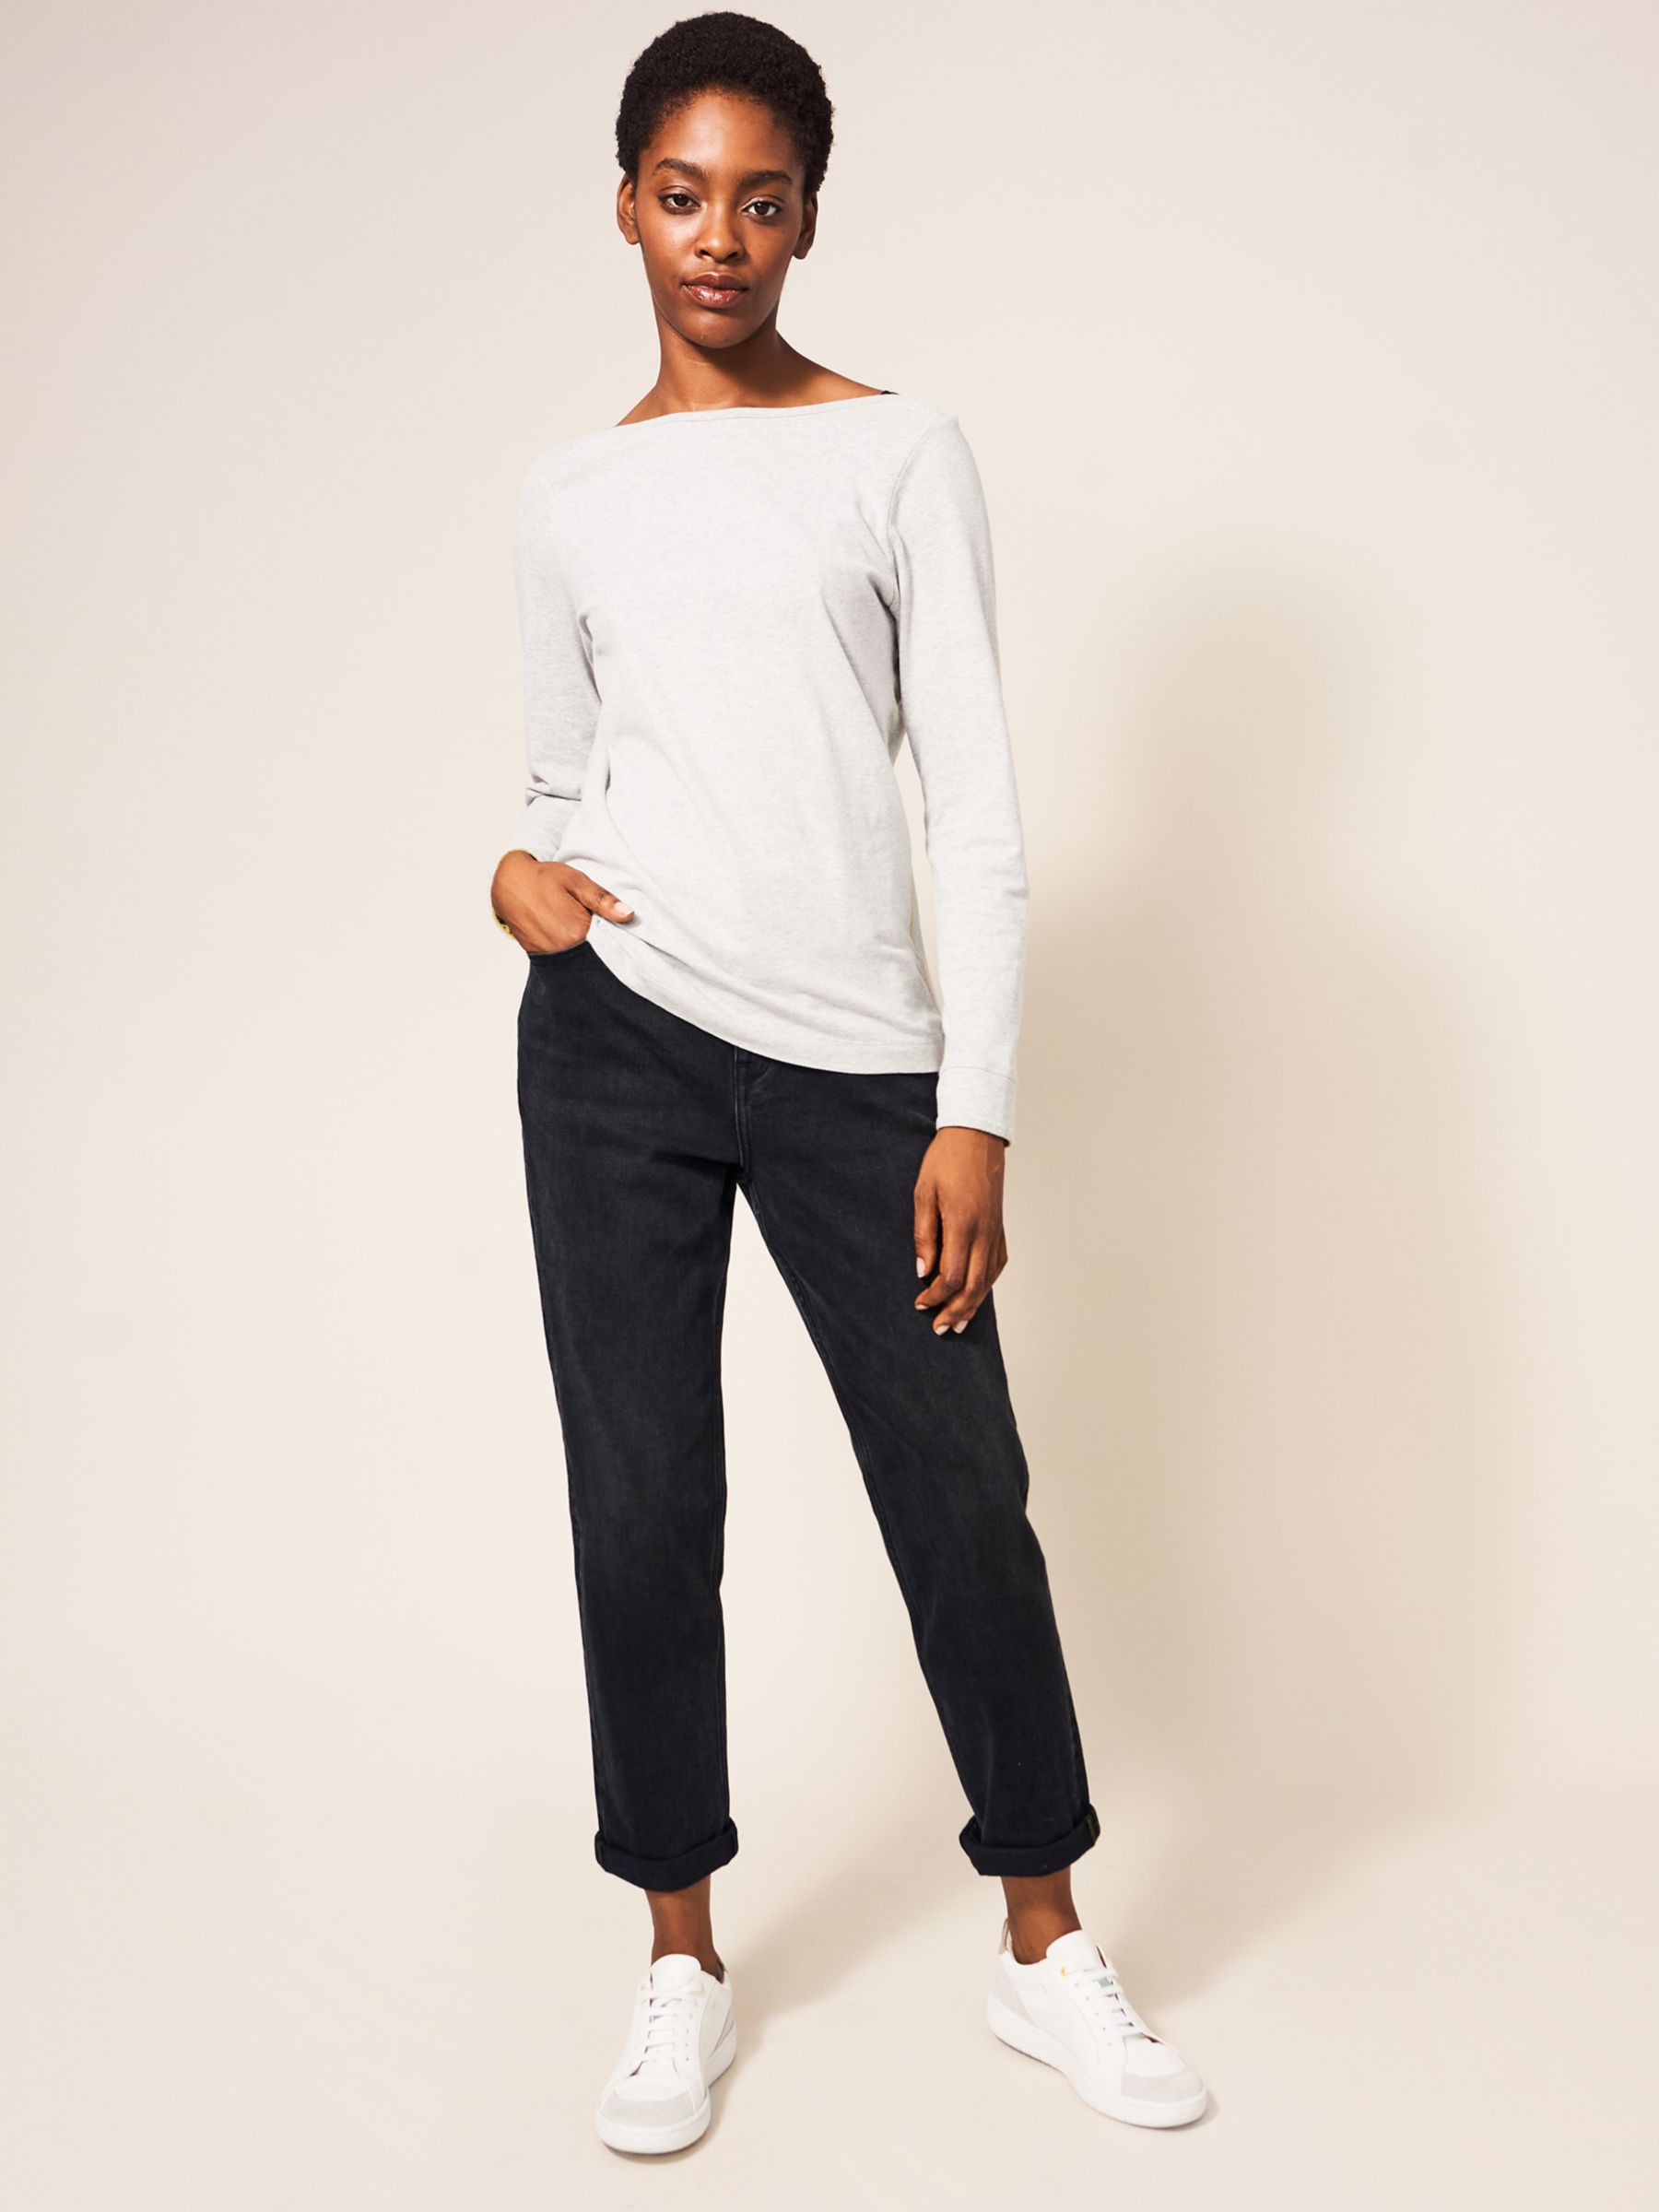 White Stuff Katy Relaxed Slim Jeans, Washed Black at John Lewis & Partners